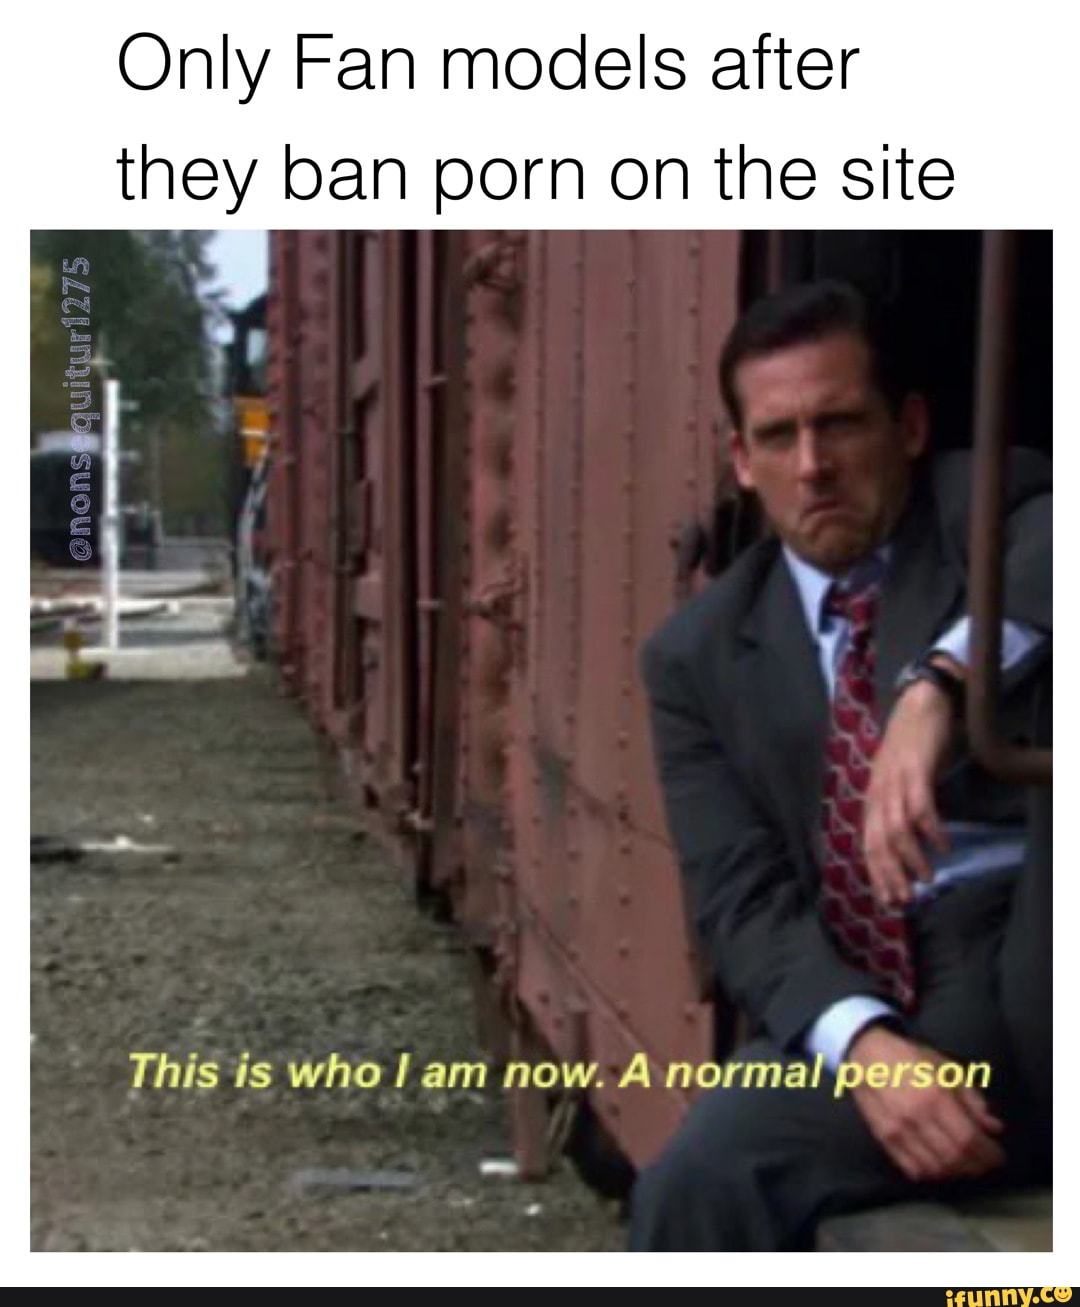 office desperate situations yield the quickest results - Only Fan models after they ban porn on the site sztlannb suouo This is who I am now. A normal person ifunny.co